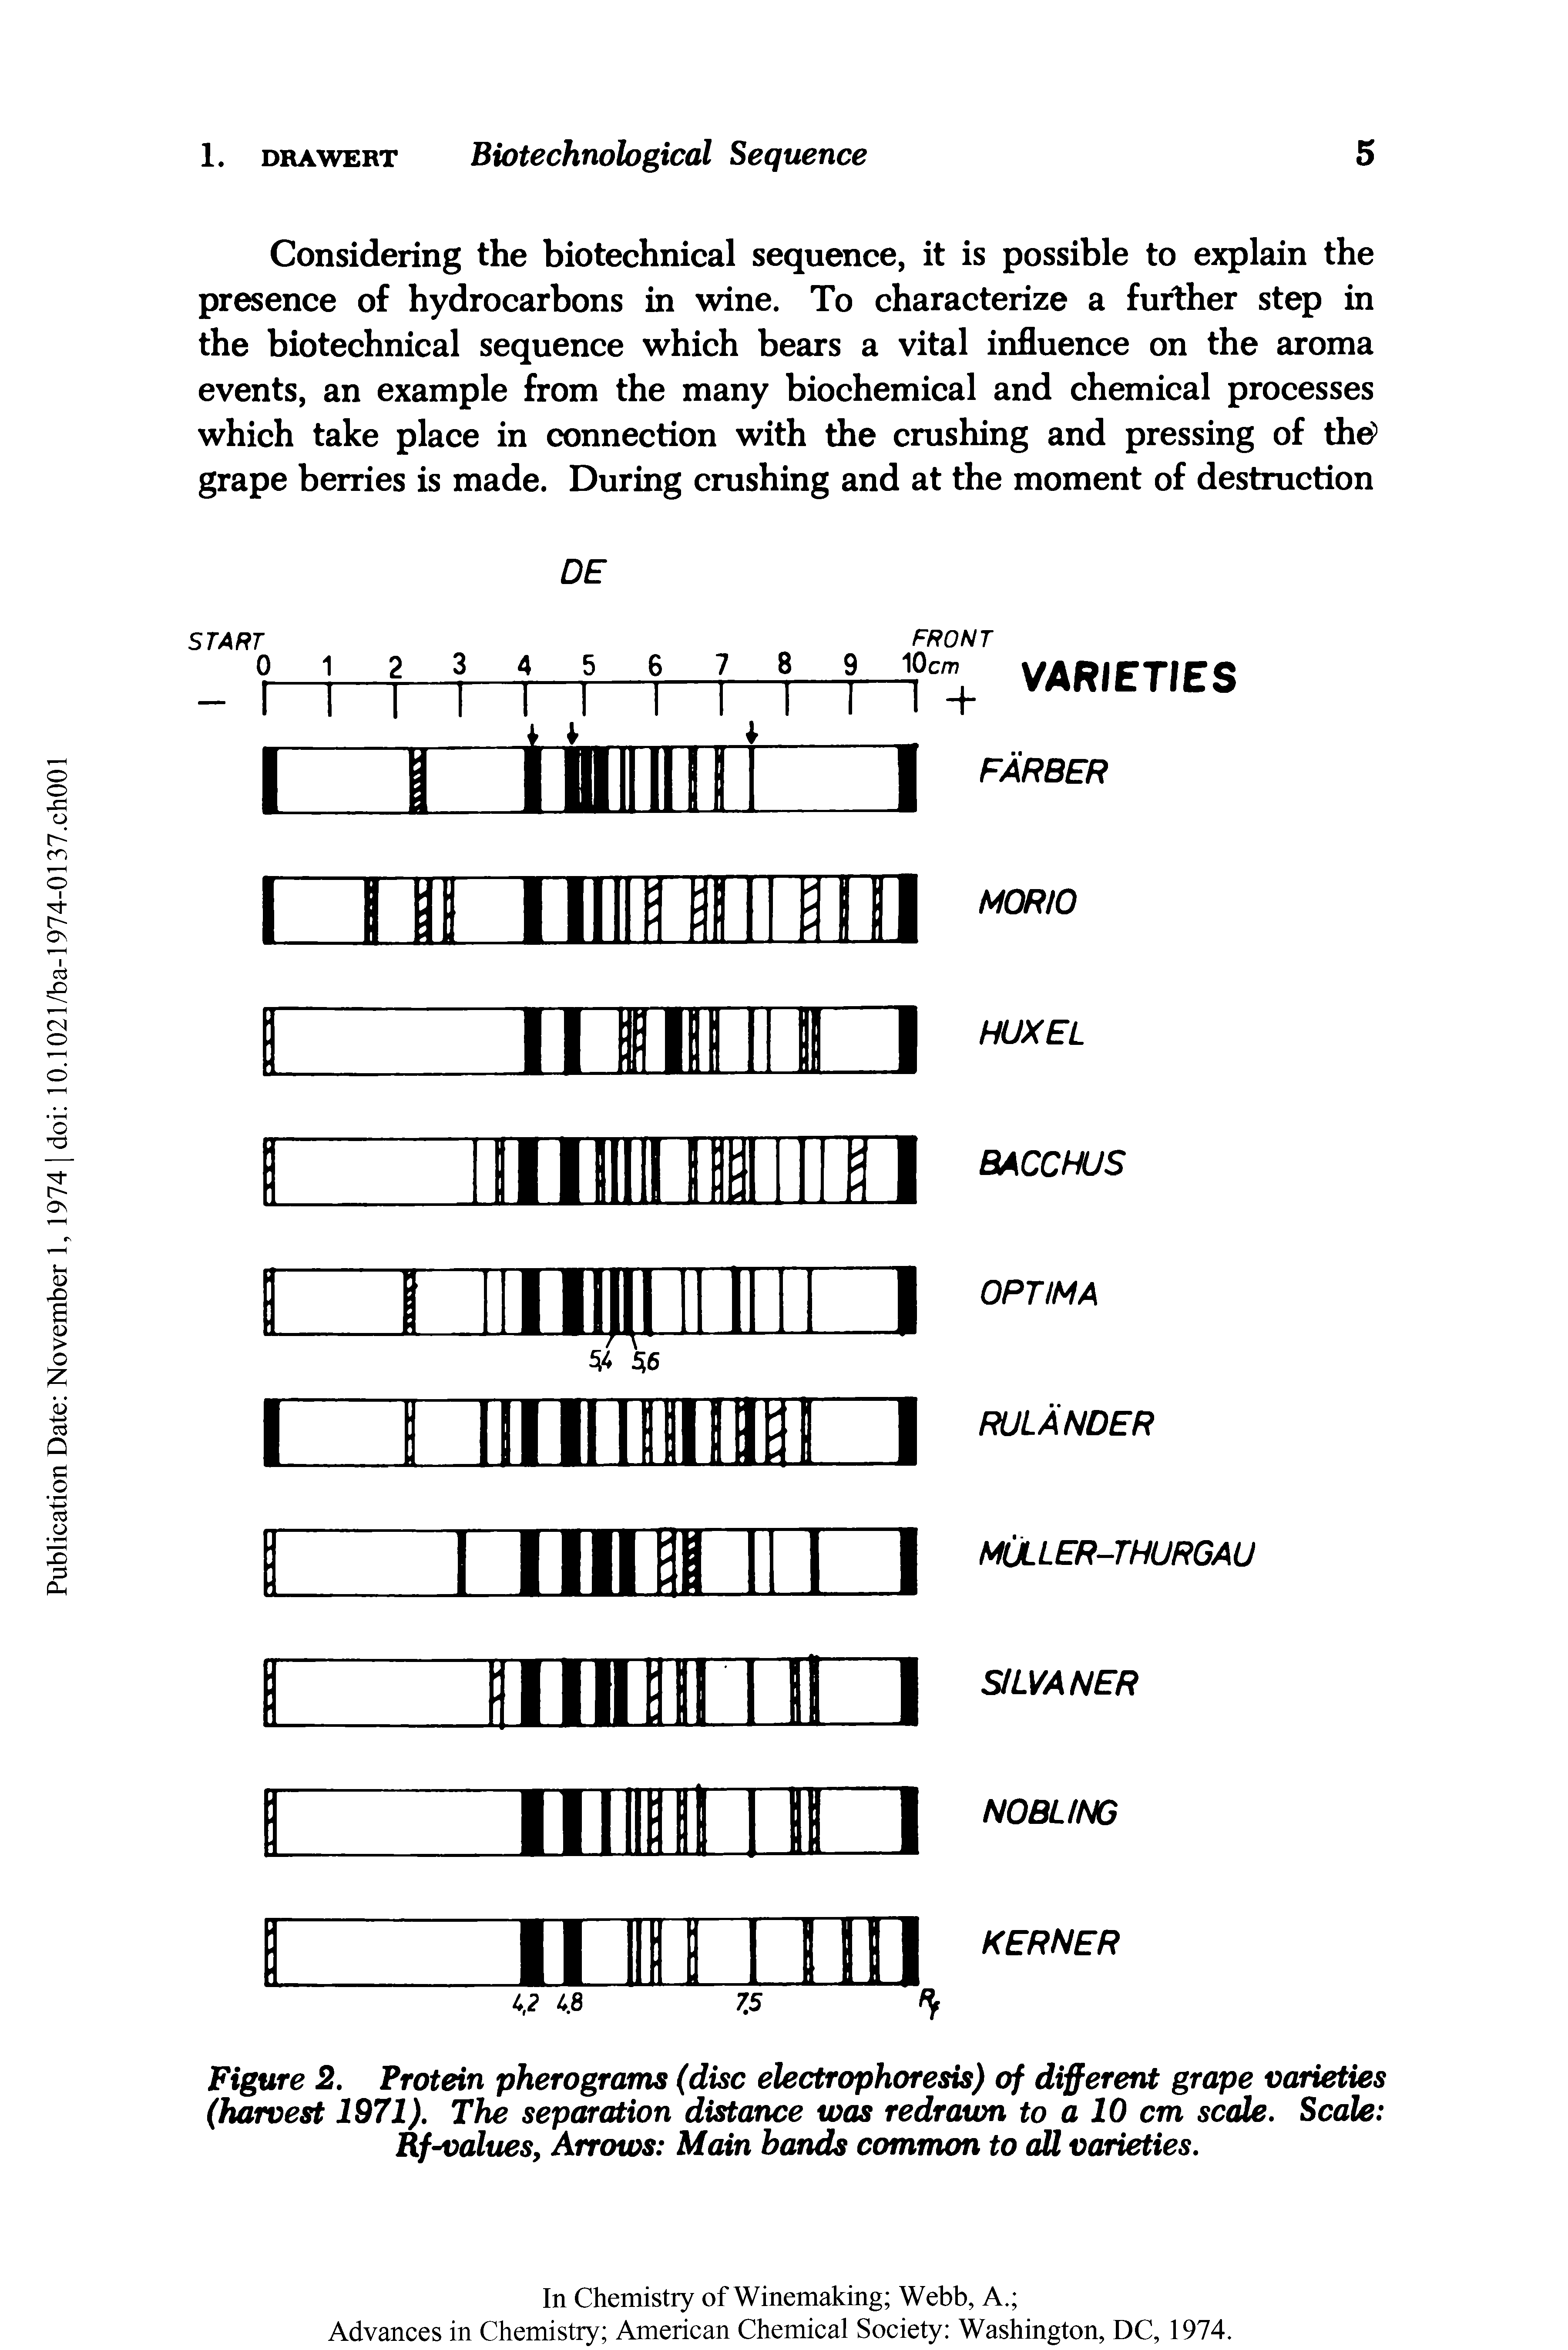 Figure 2. Protein pherograms (disc electrophoresis) of different grape varieties (harvest 1971). The separation distance was redrawn to a 10 cm scale. Scale Rf-values, Arrows Main bands common to all varieties.